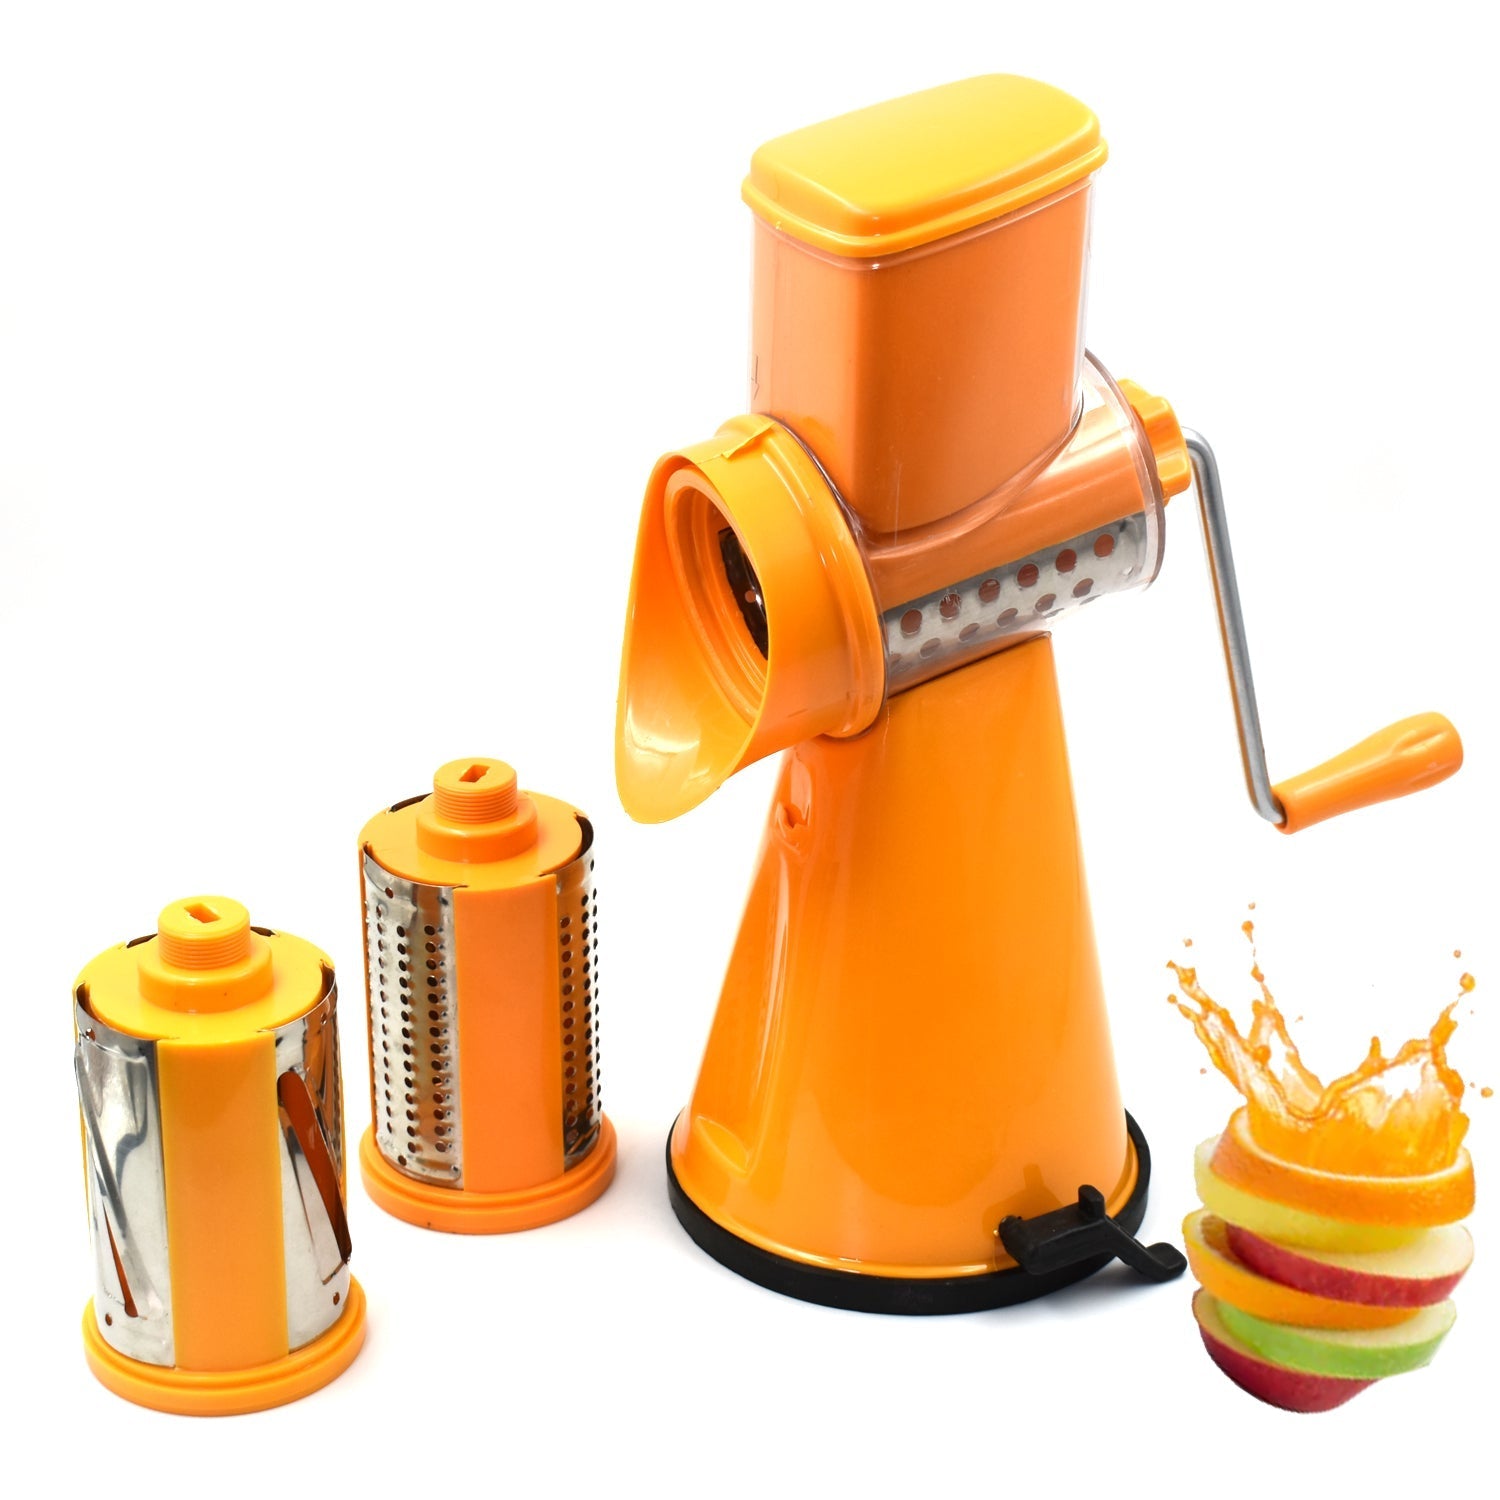 2754 Manual Fruit Juicer Used For Making And Producing Juices Physically. freeshipping - DeoDap